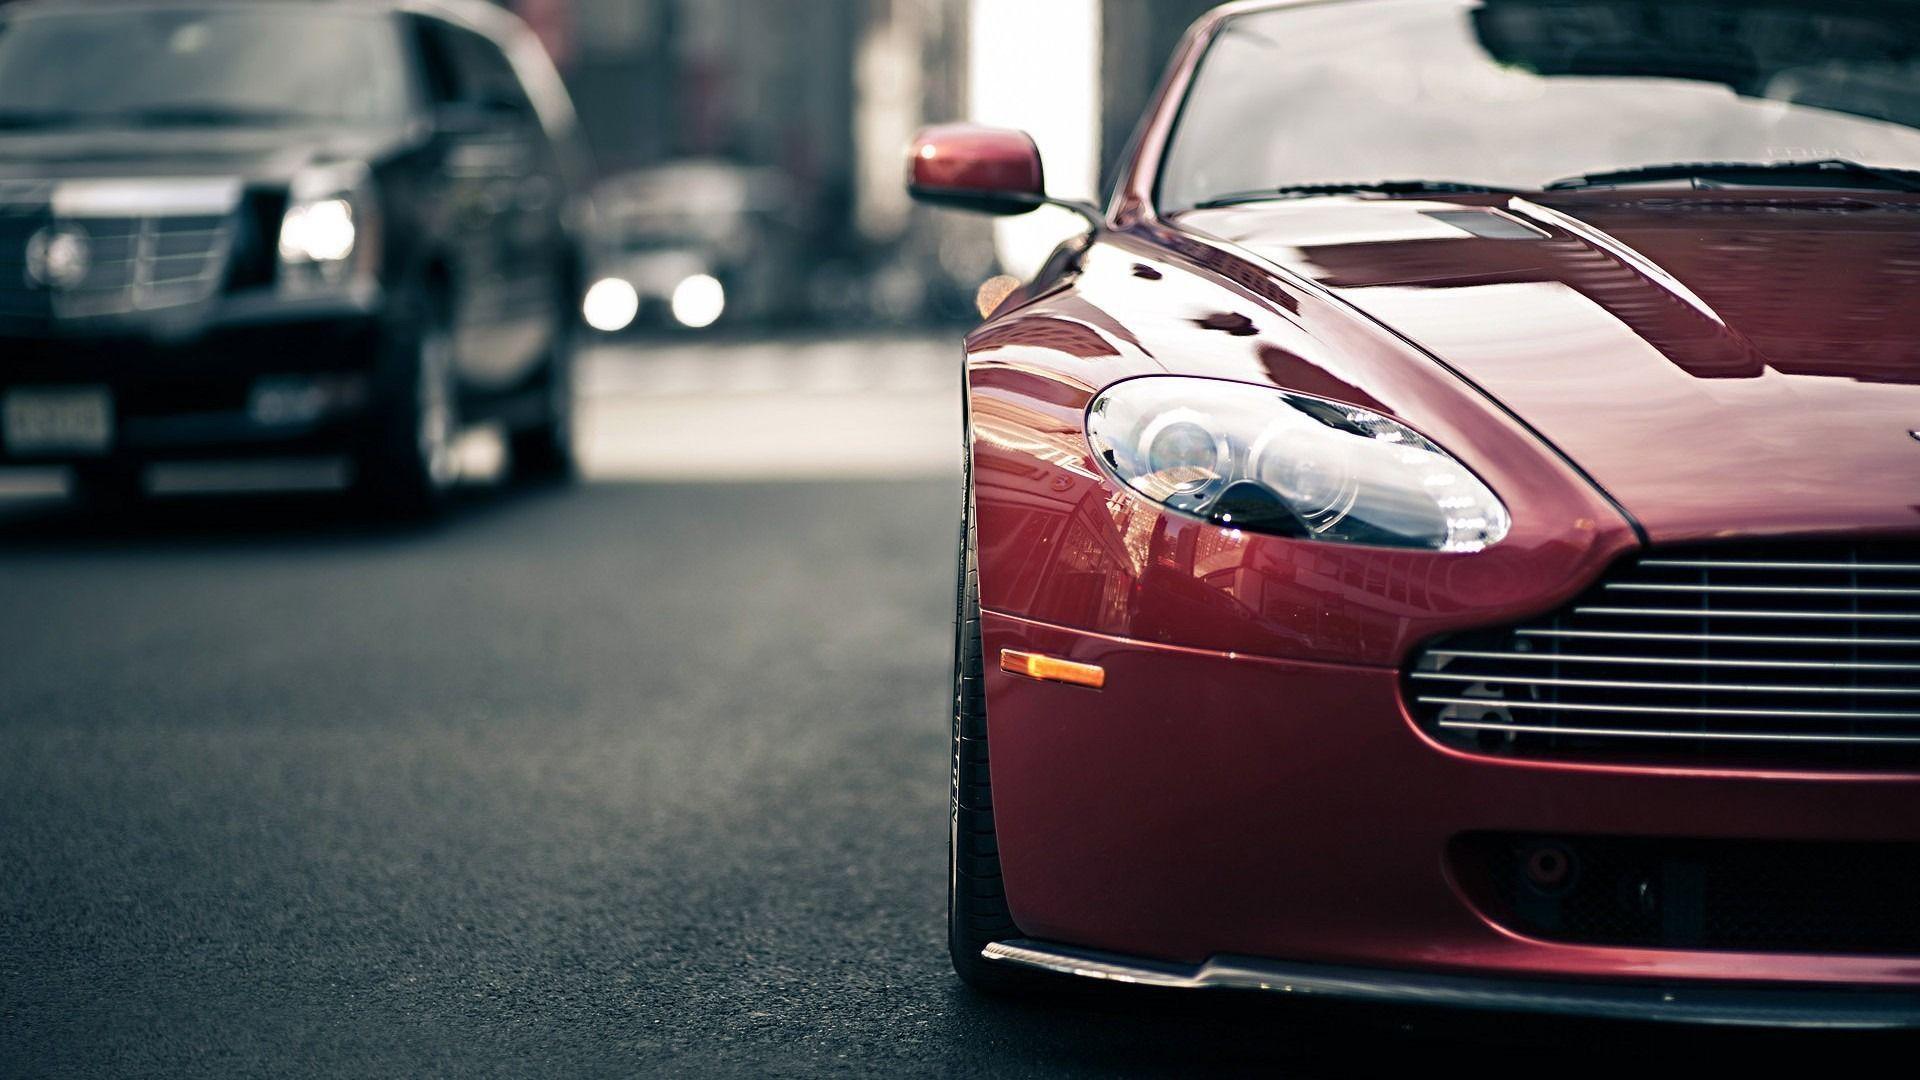 Wallpapers For > Aston Martin Wallpapers 1080p